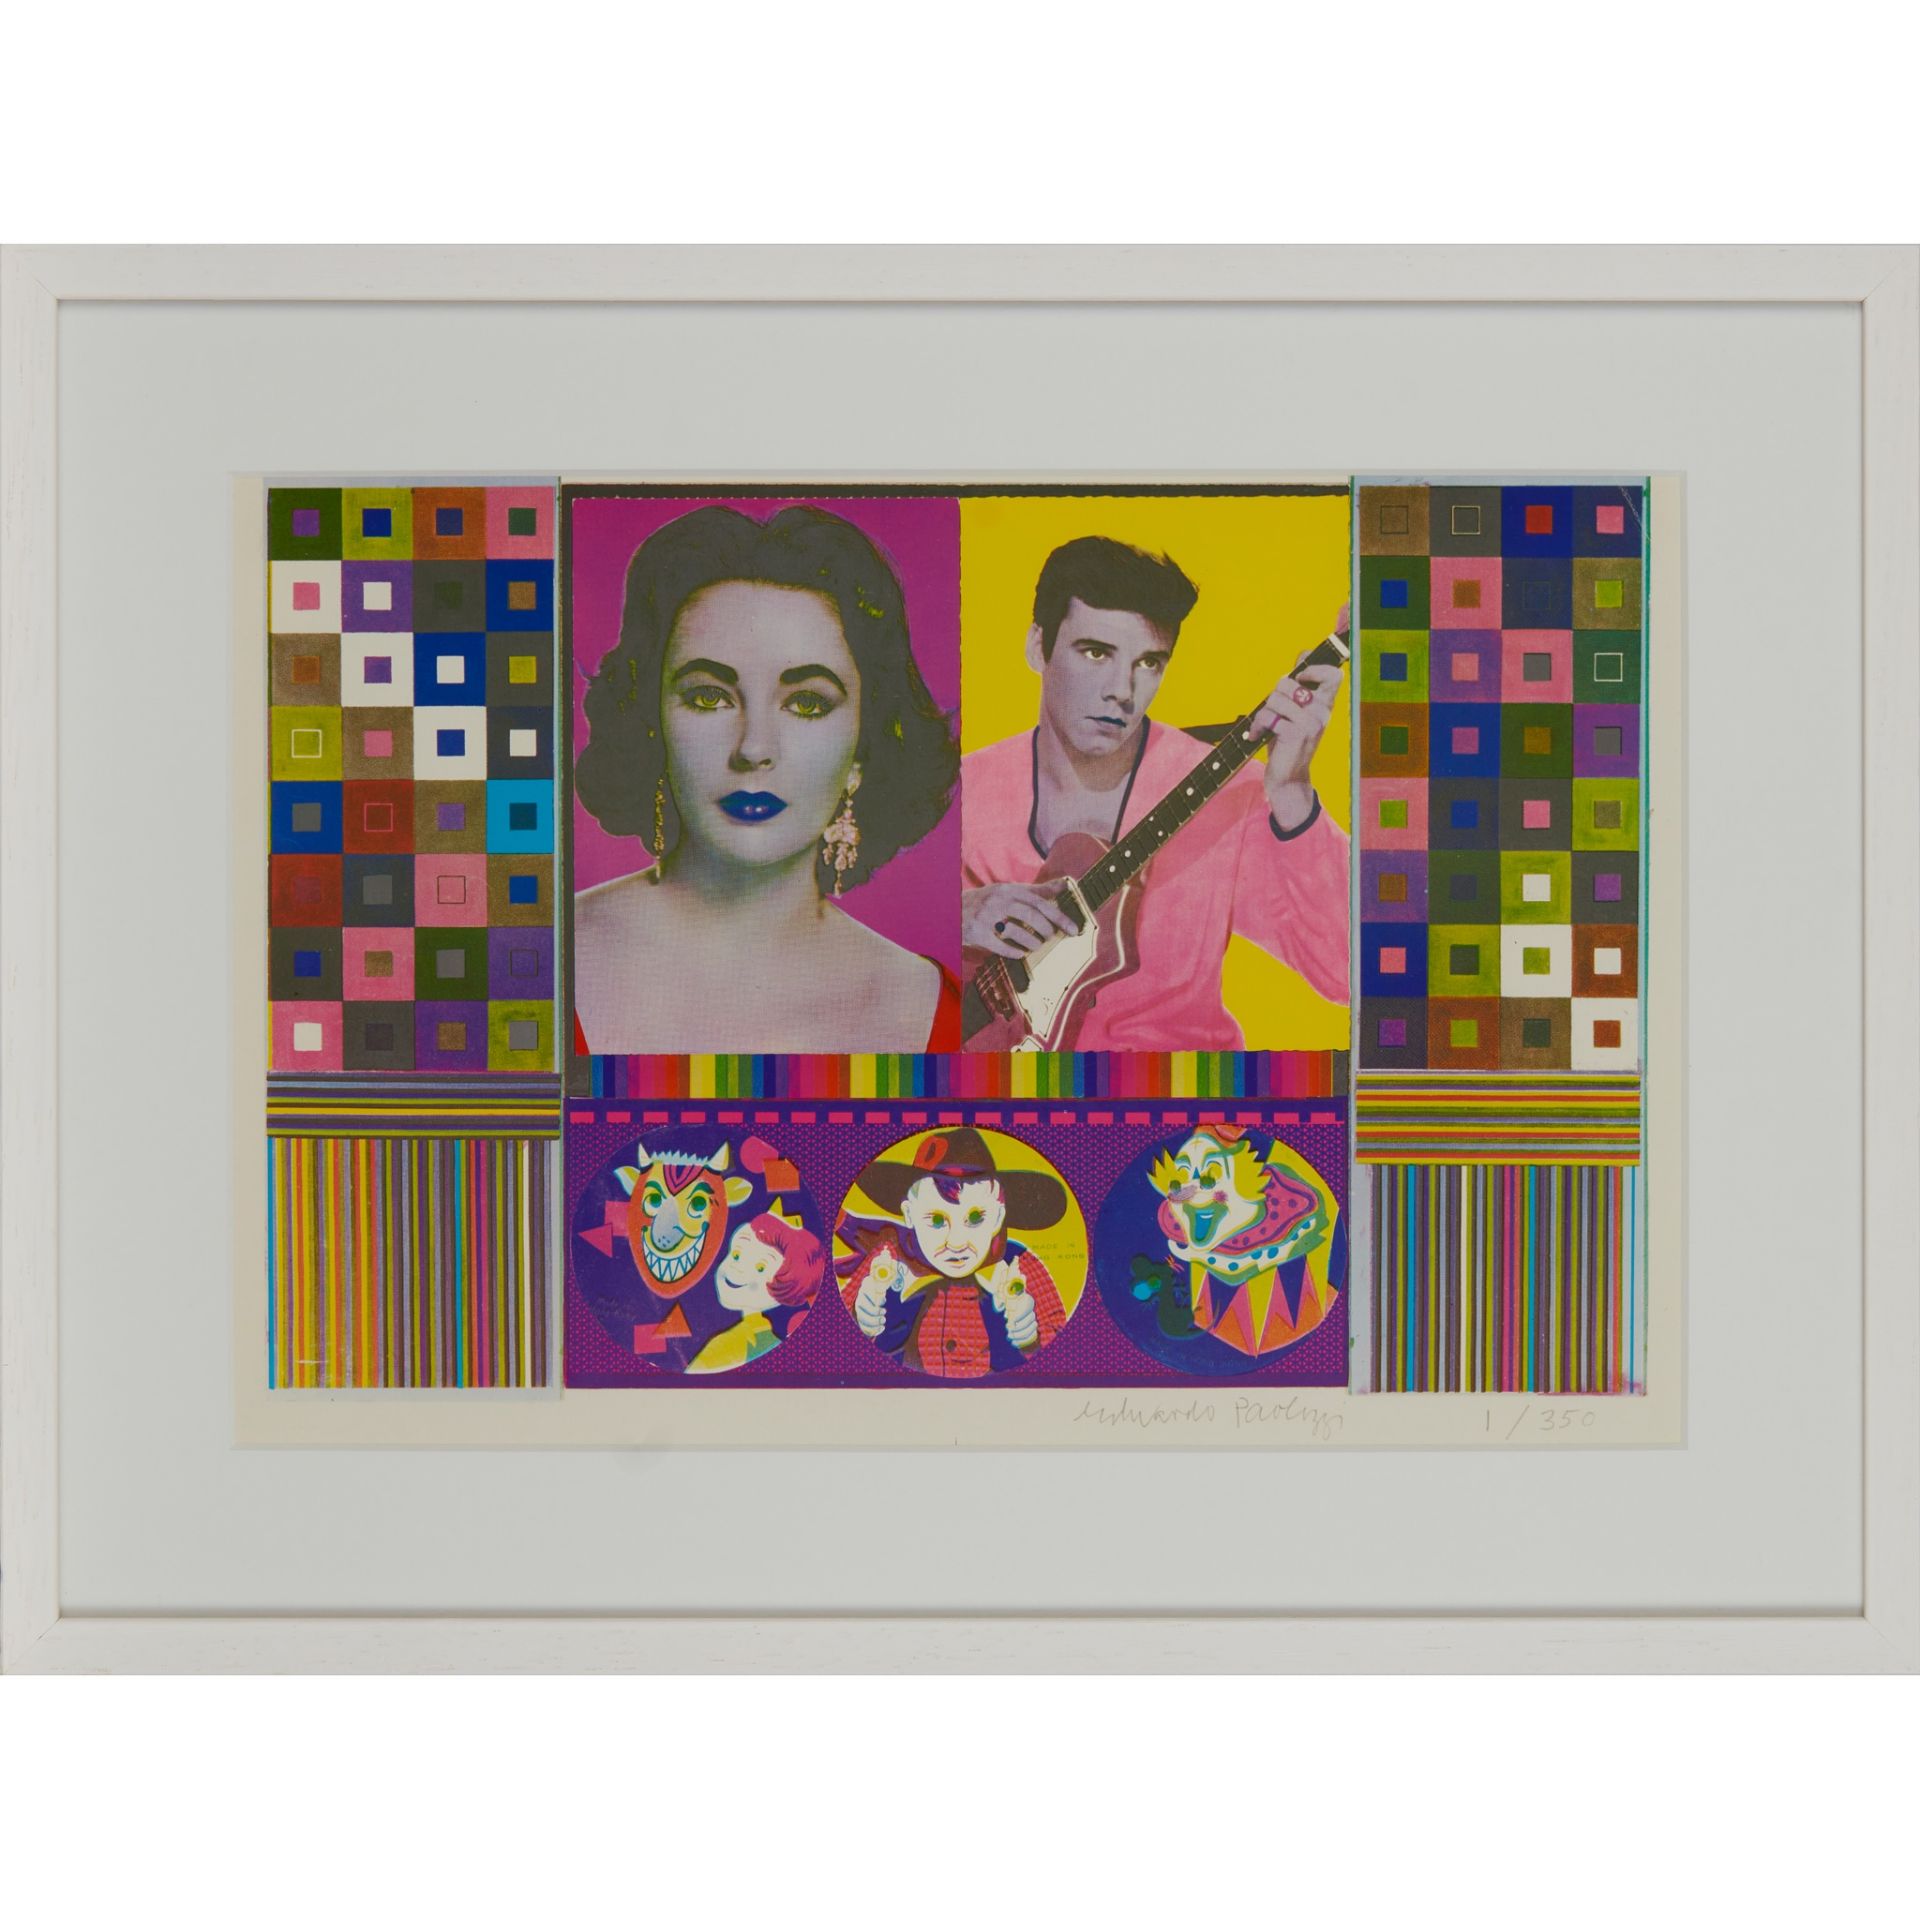 § EDUARDO PAOLOZZI K.B.E., R.A., H.R.S.A. (SCOTTISH 1924-2005) JESUS COLOUR BY NUMBERS, from - Image 5 of 6